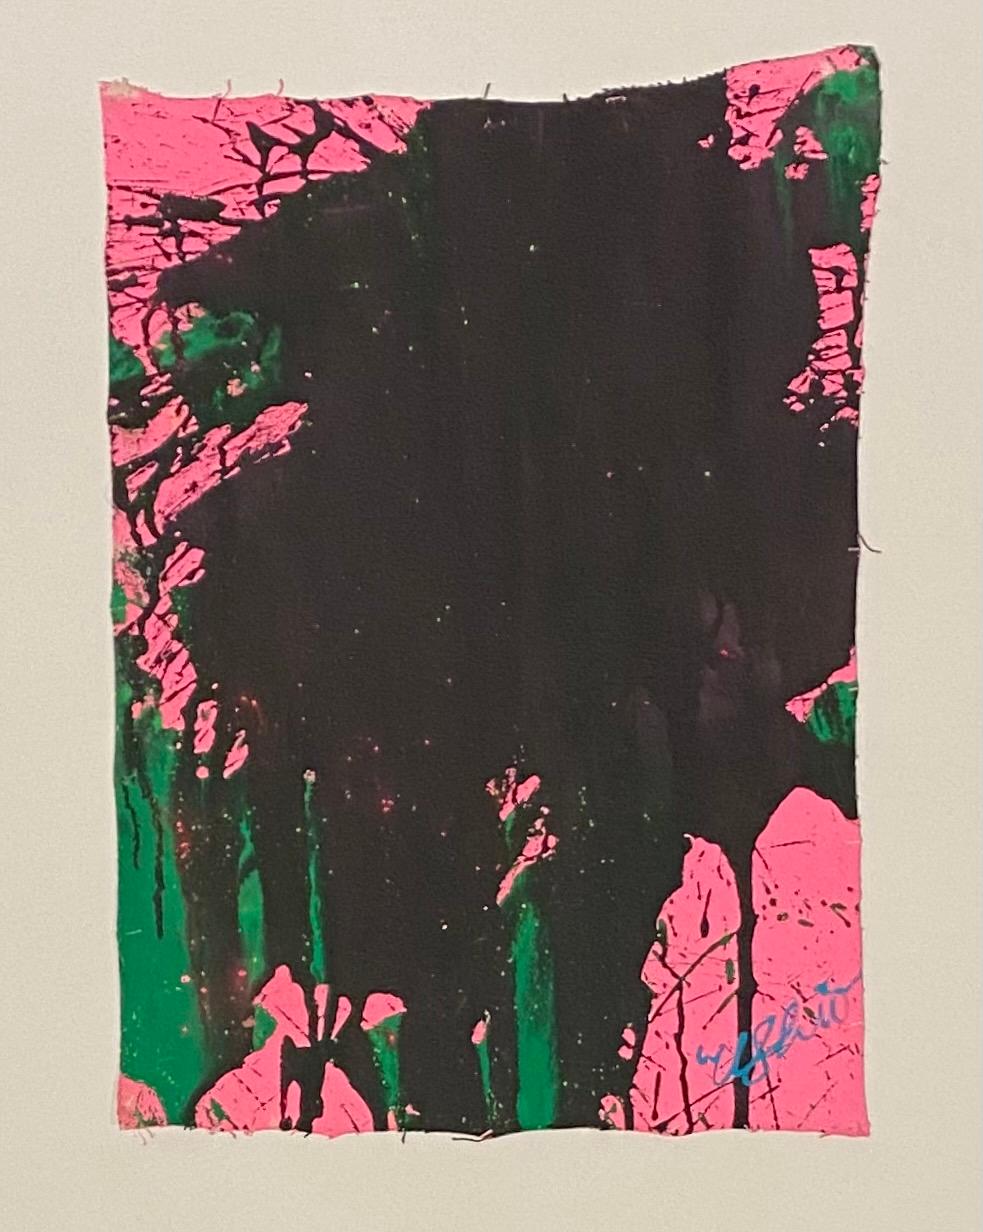 Ushio Shinohara Abstract Painting - "Emerald Green and Black on Pastel Pink, " Acrylic on Canvas - Abstract painting